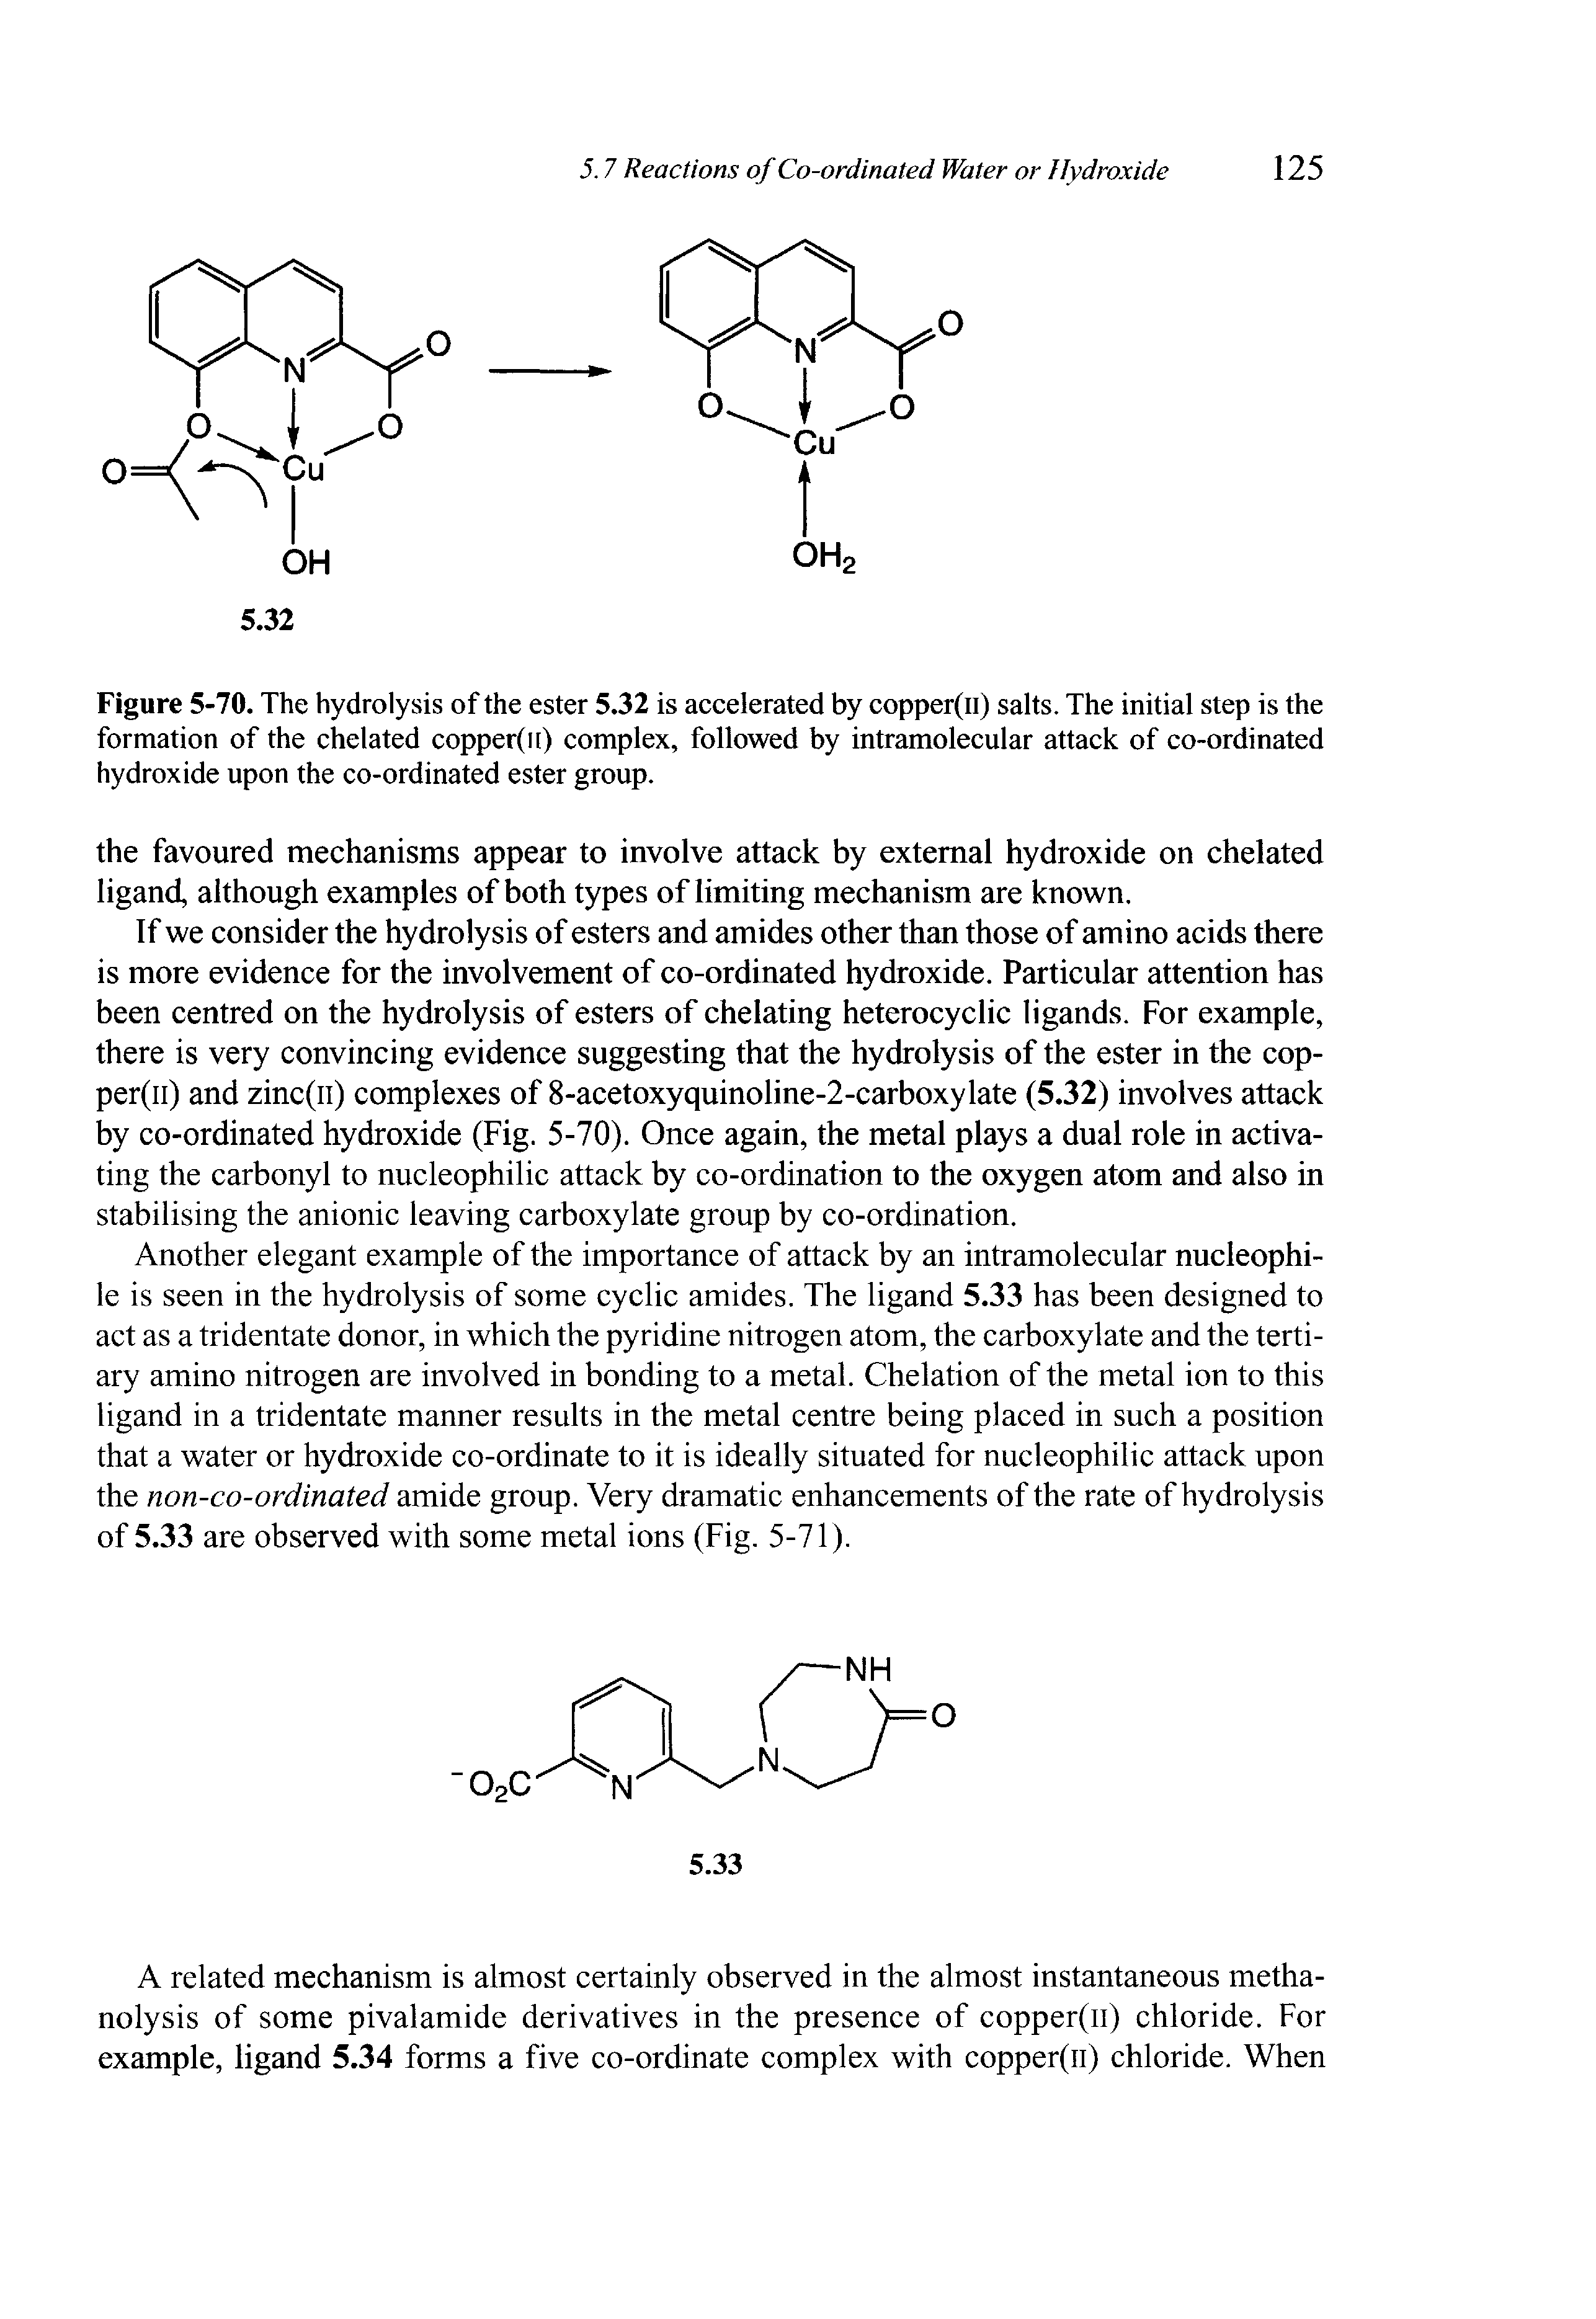 Figure 5-70. The hydrolysis of the ester 5.32 is accelerated by copper(n) salts. The initial step is the formation of the chelated copper(n) complex, followed by intramolecular attack of co-ordinated hydroxide upon the co-ordinated ester group.